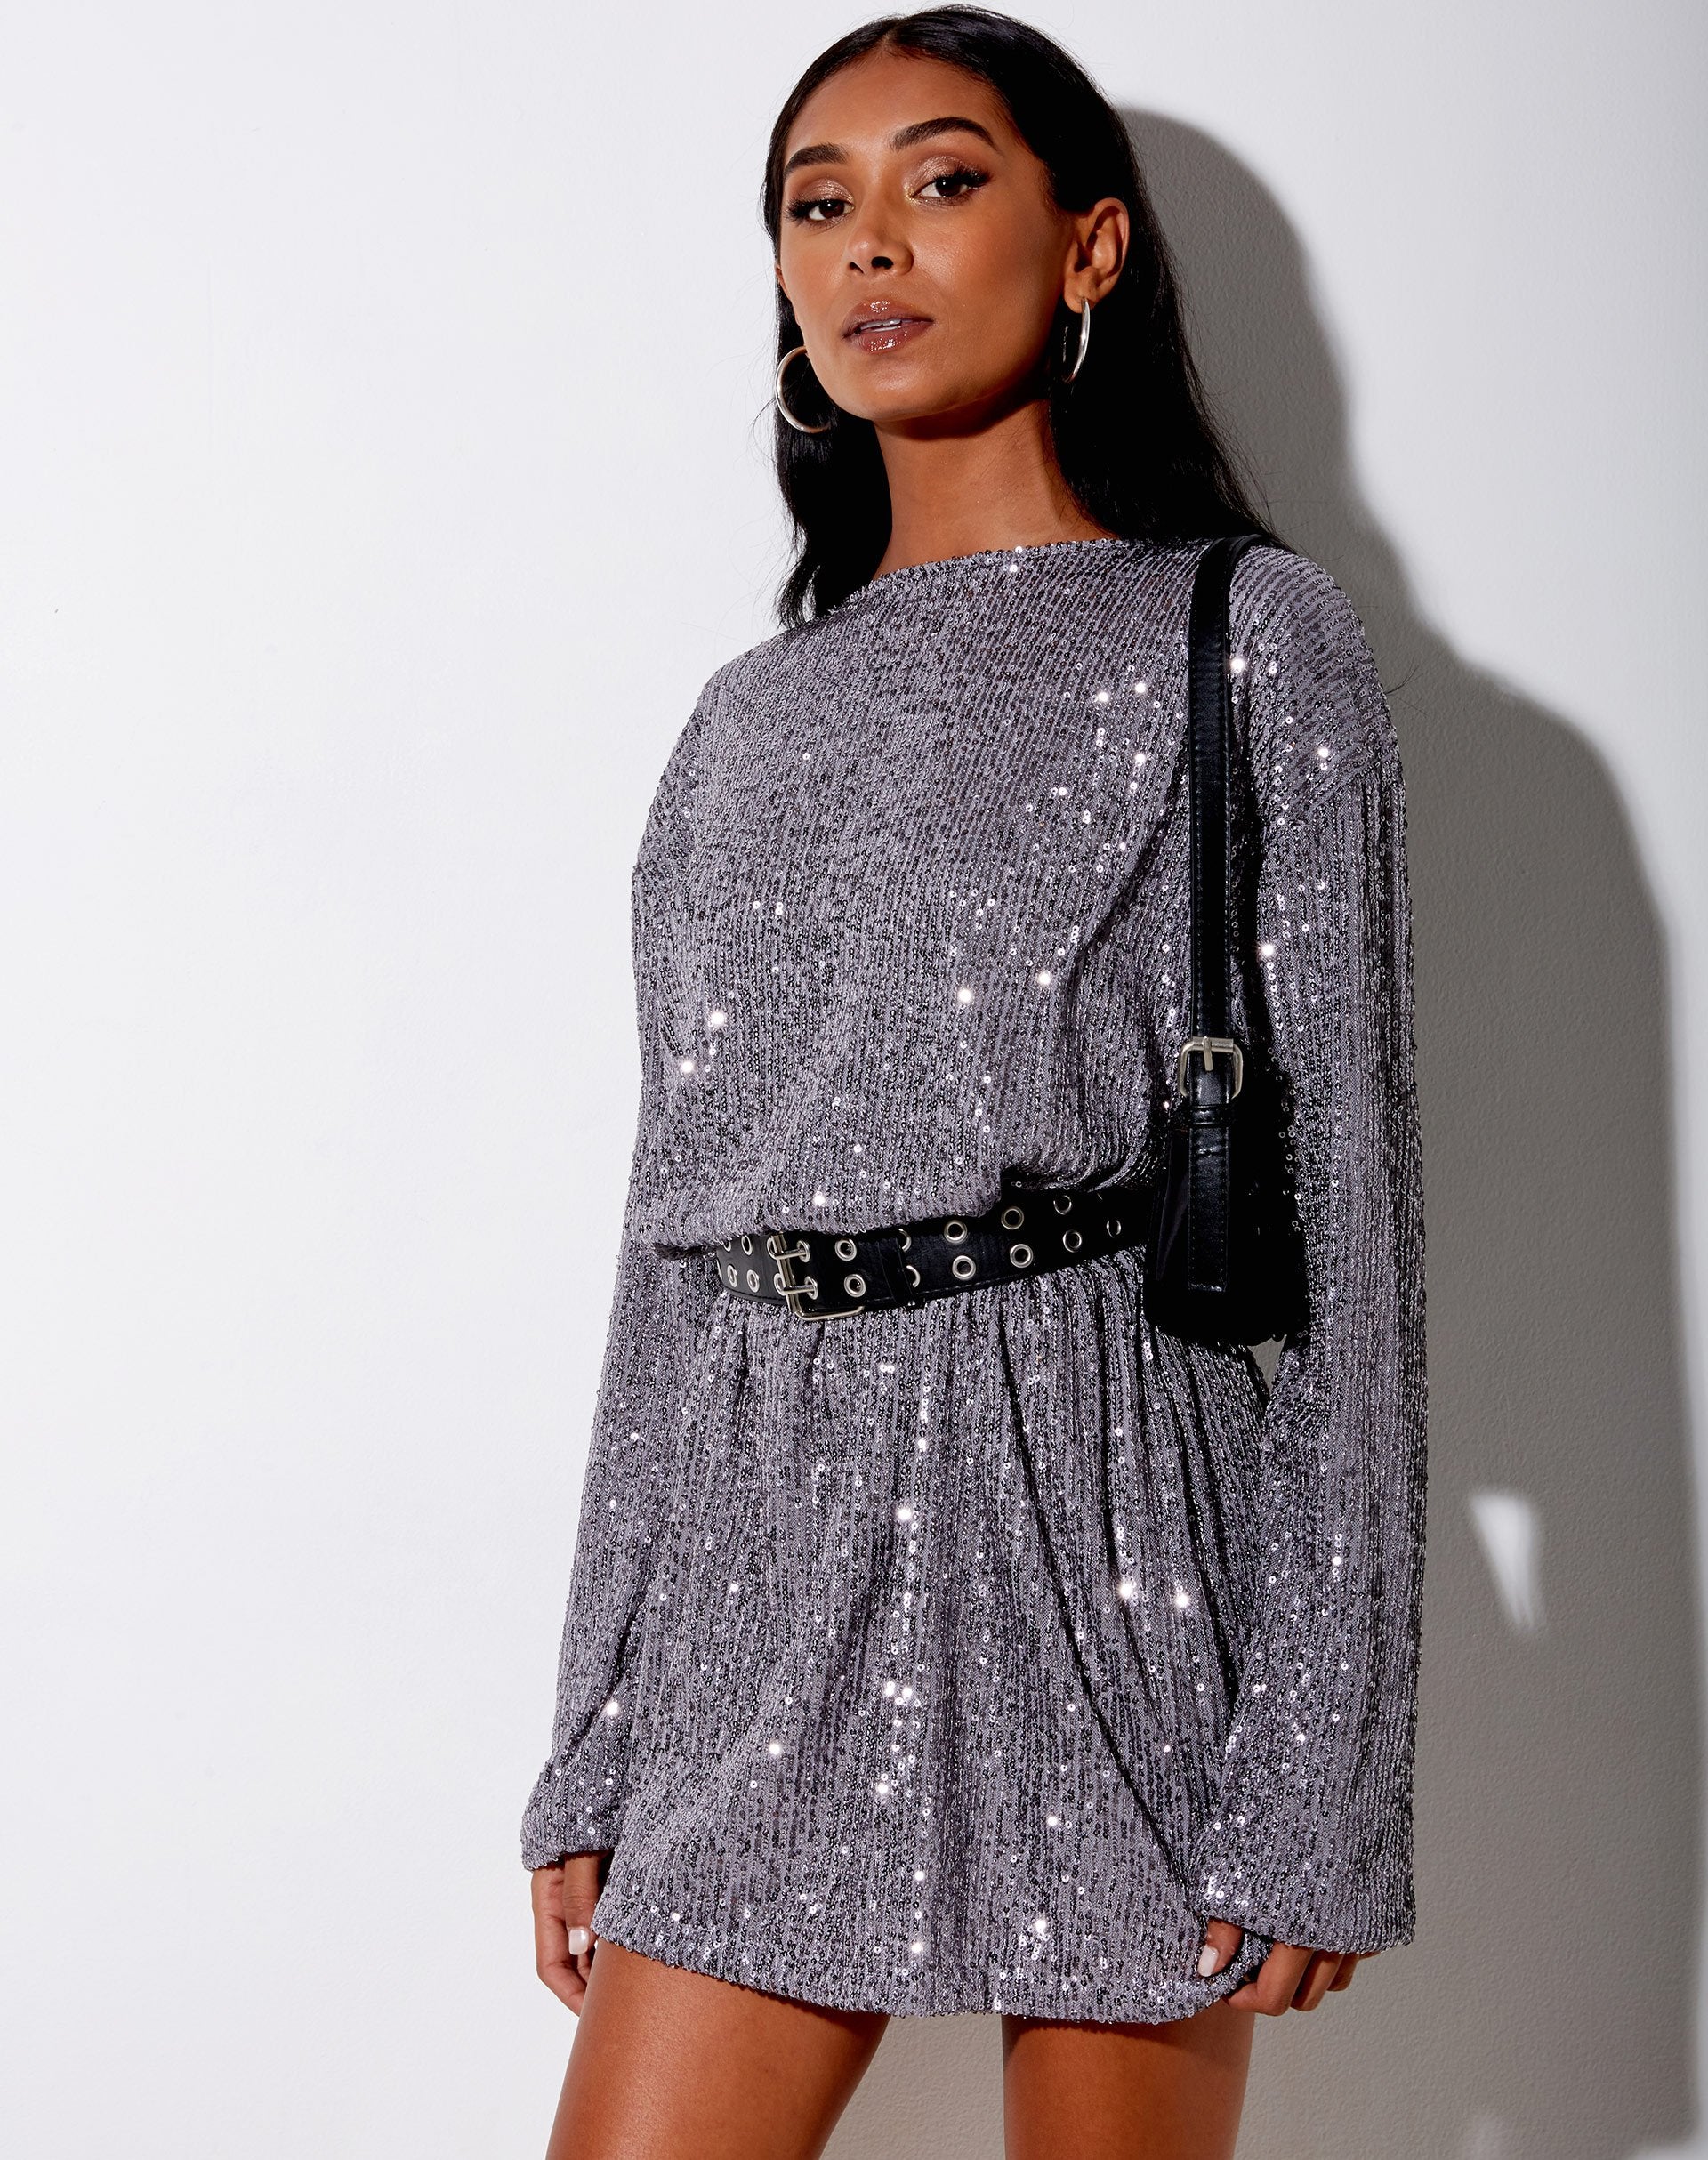 Image of Liama Dress in Stretch Sequin Silver